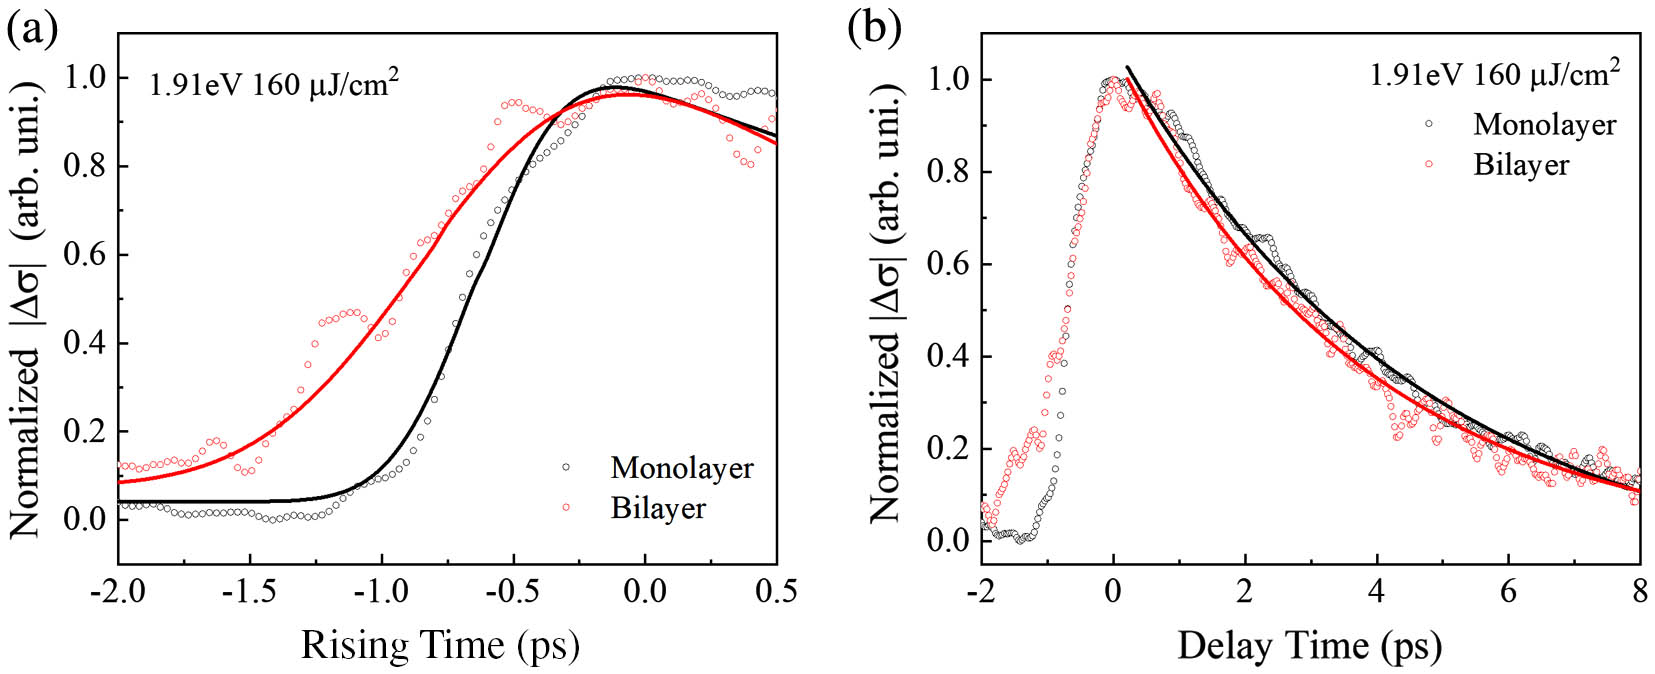 (a) Photoinduced THz conductivity of MLG and BLG as a function of the rising time at 1.91 eV, 160 µJ/cm2; (b) photoinduced THz conductivity of MLG and BLG as a function of the delay time at 1.91 eV, 160 µJ/cm2.